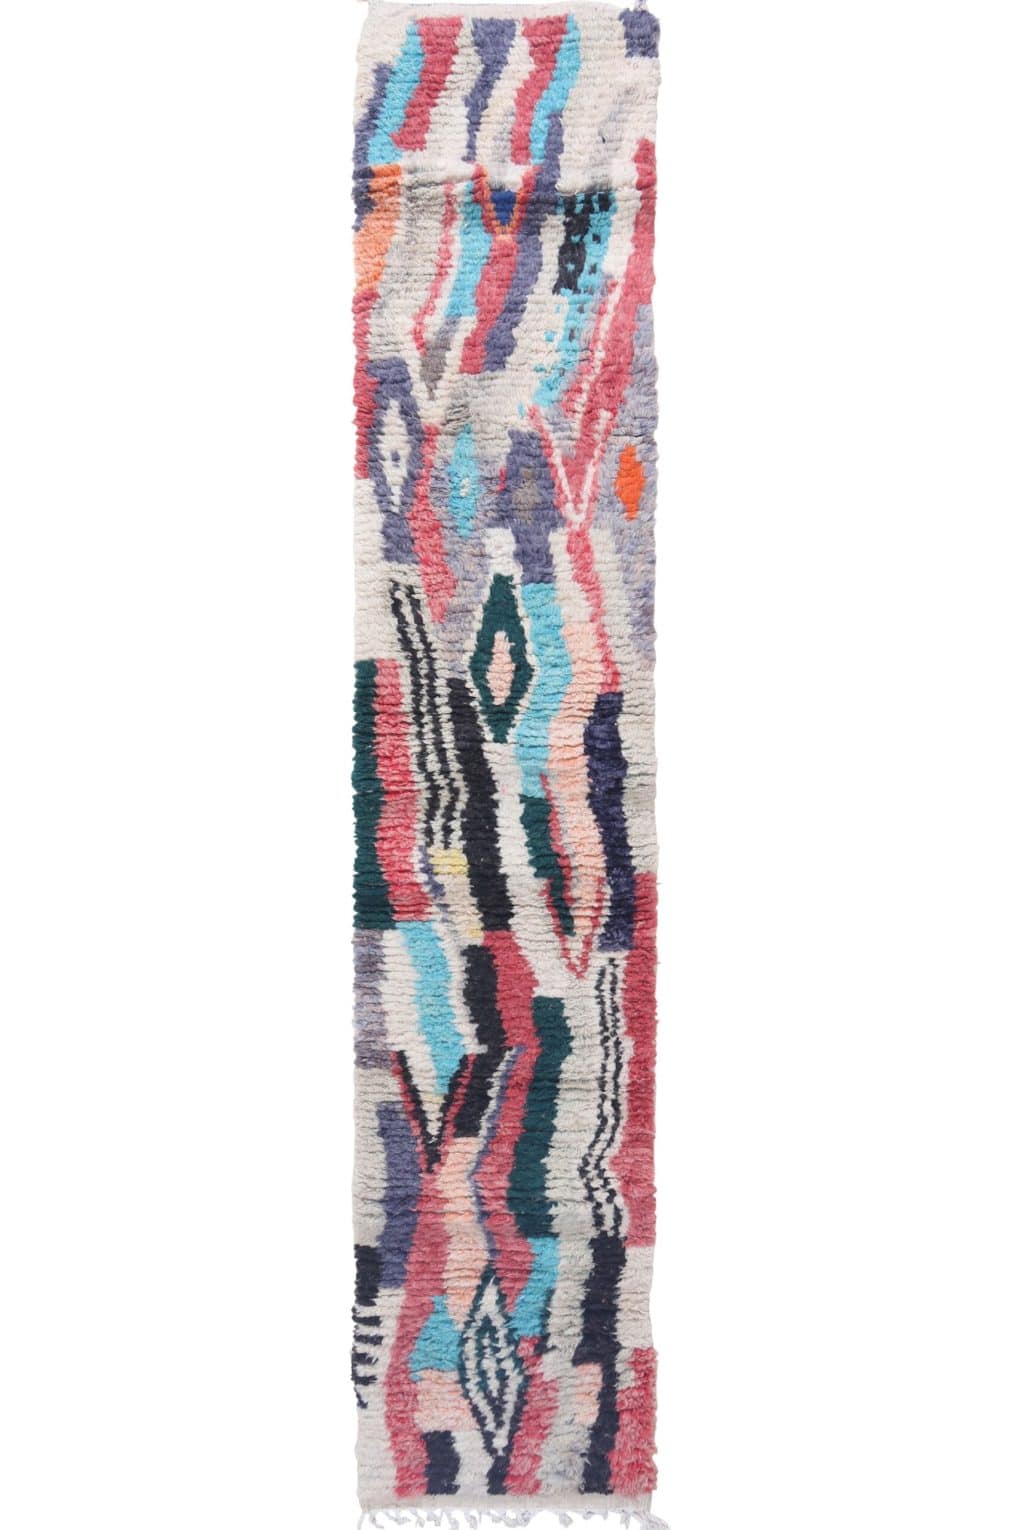 Moroccan abstract runner with vibrant colors and bold patterns